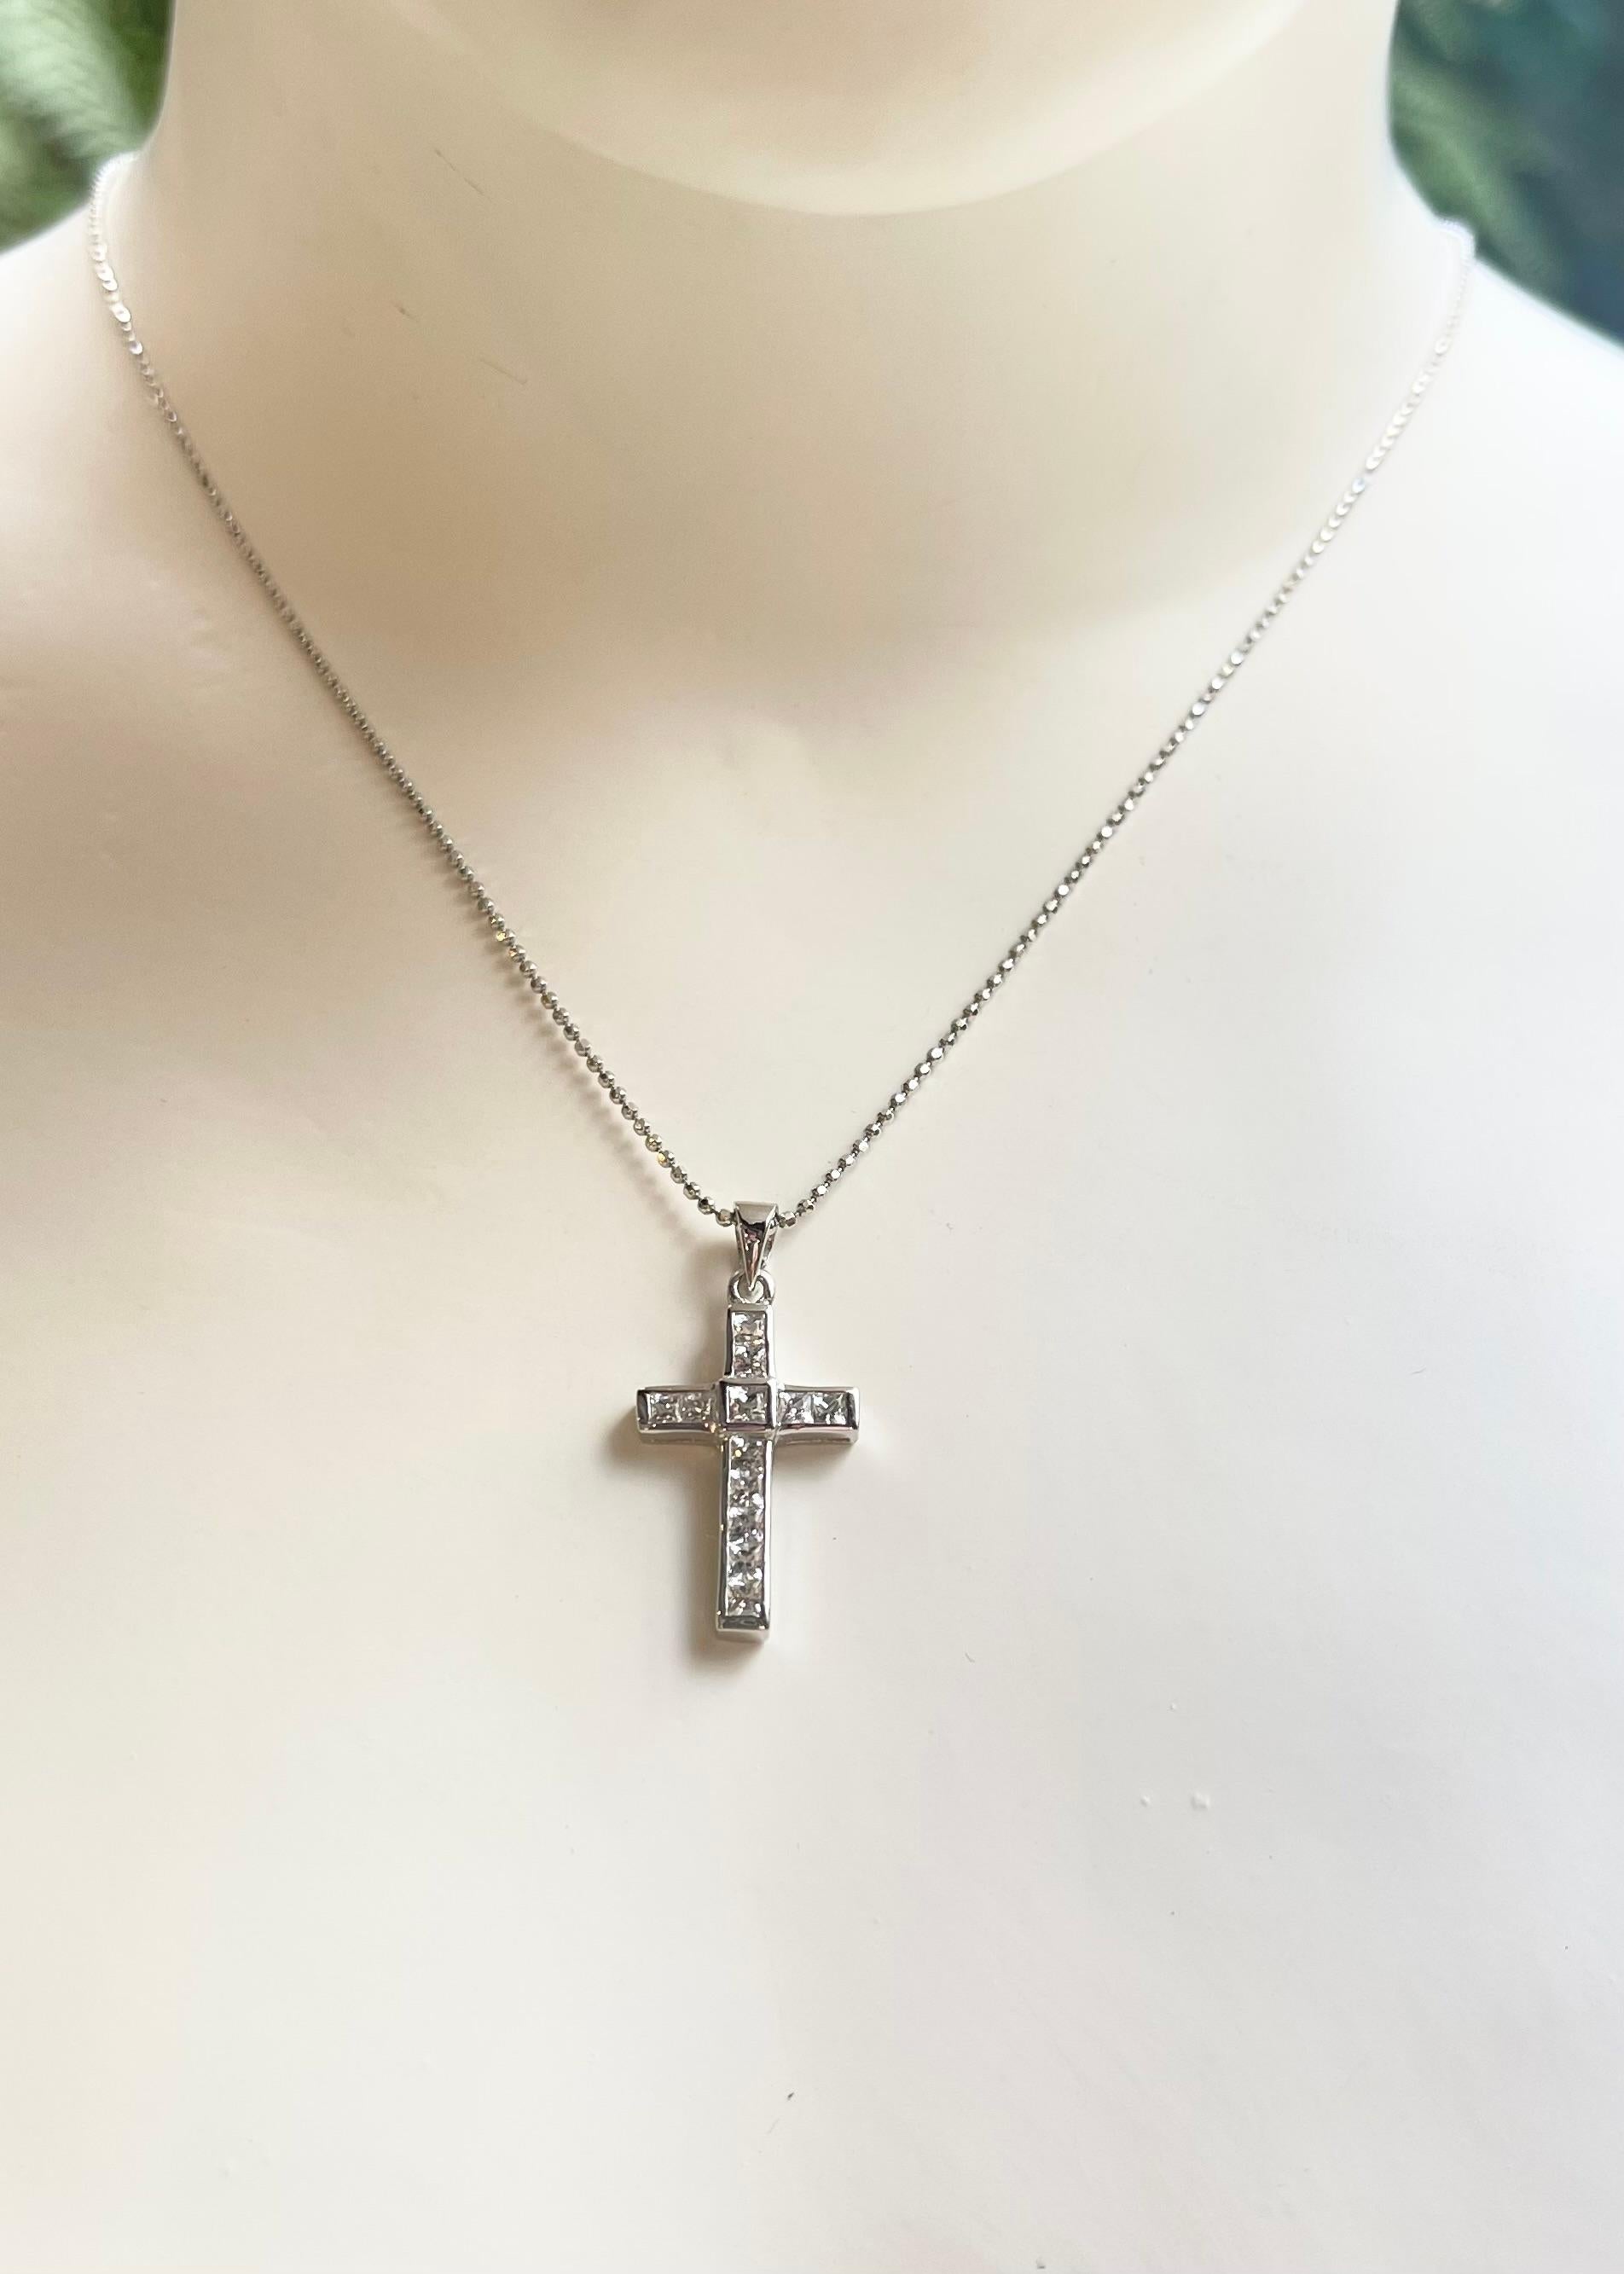 White Sapphire 0.82 carat Cross Pendant set in 18K White Gold Settings
(chain not included)

Width: 1.3 cm 
Length: 2.7 cm
Total Weight: 2.36 grams

